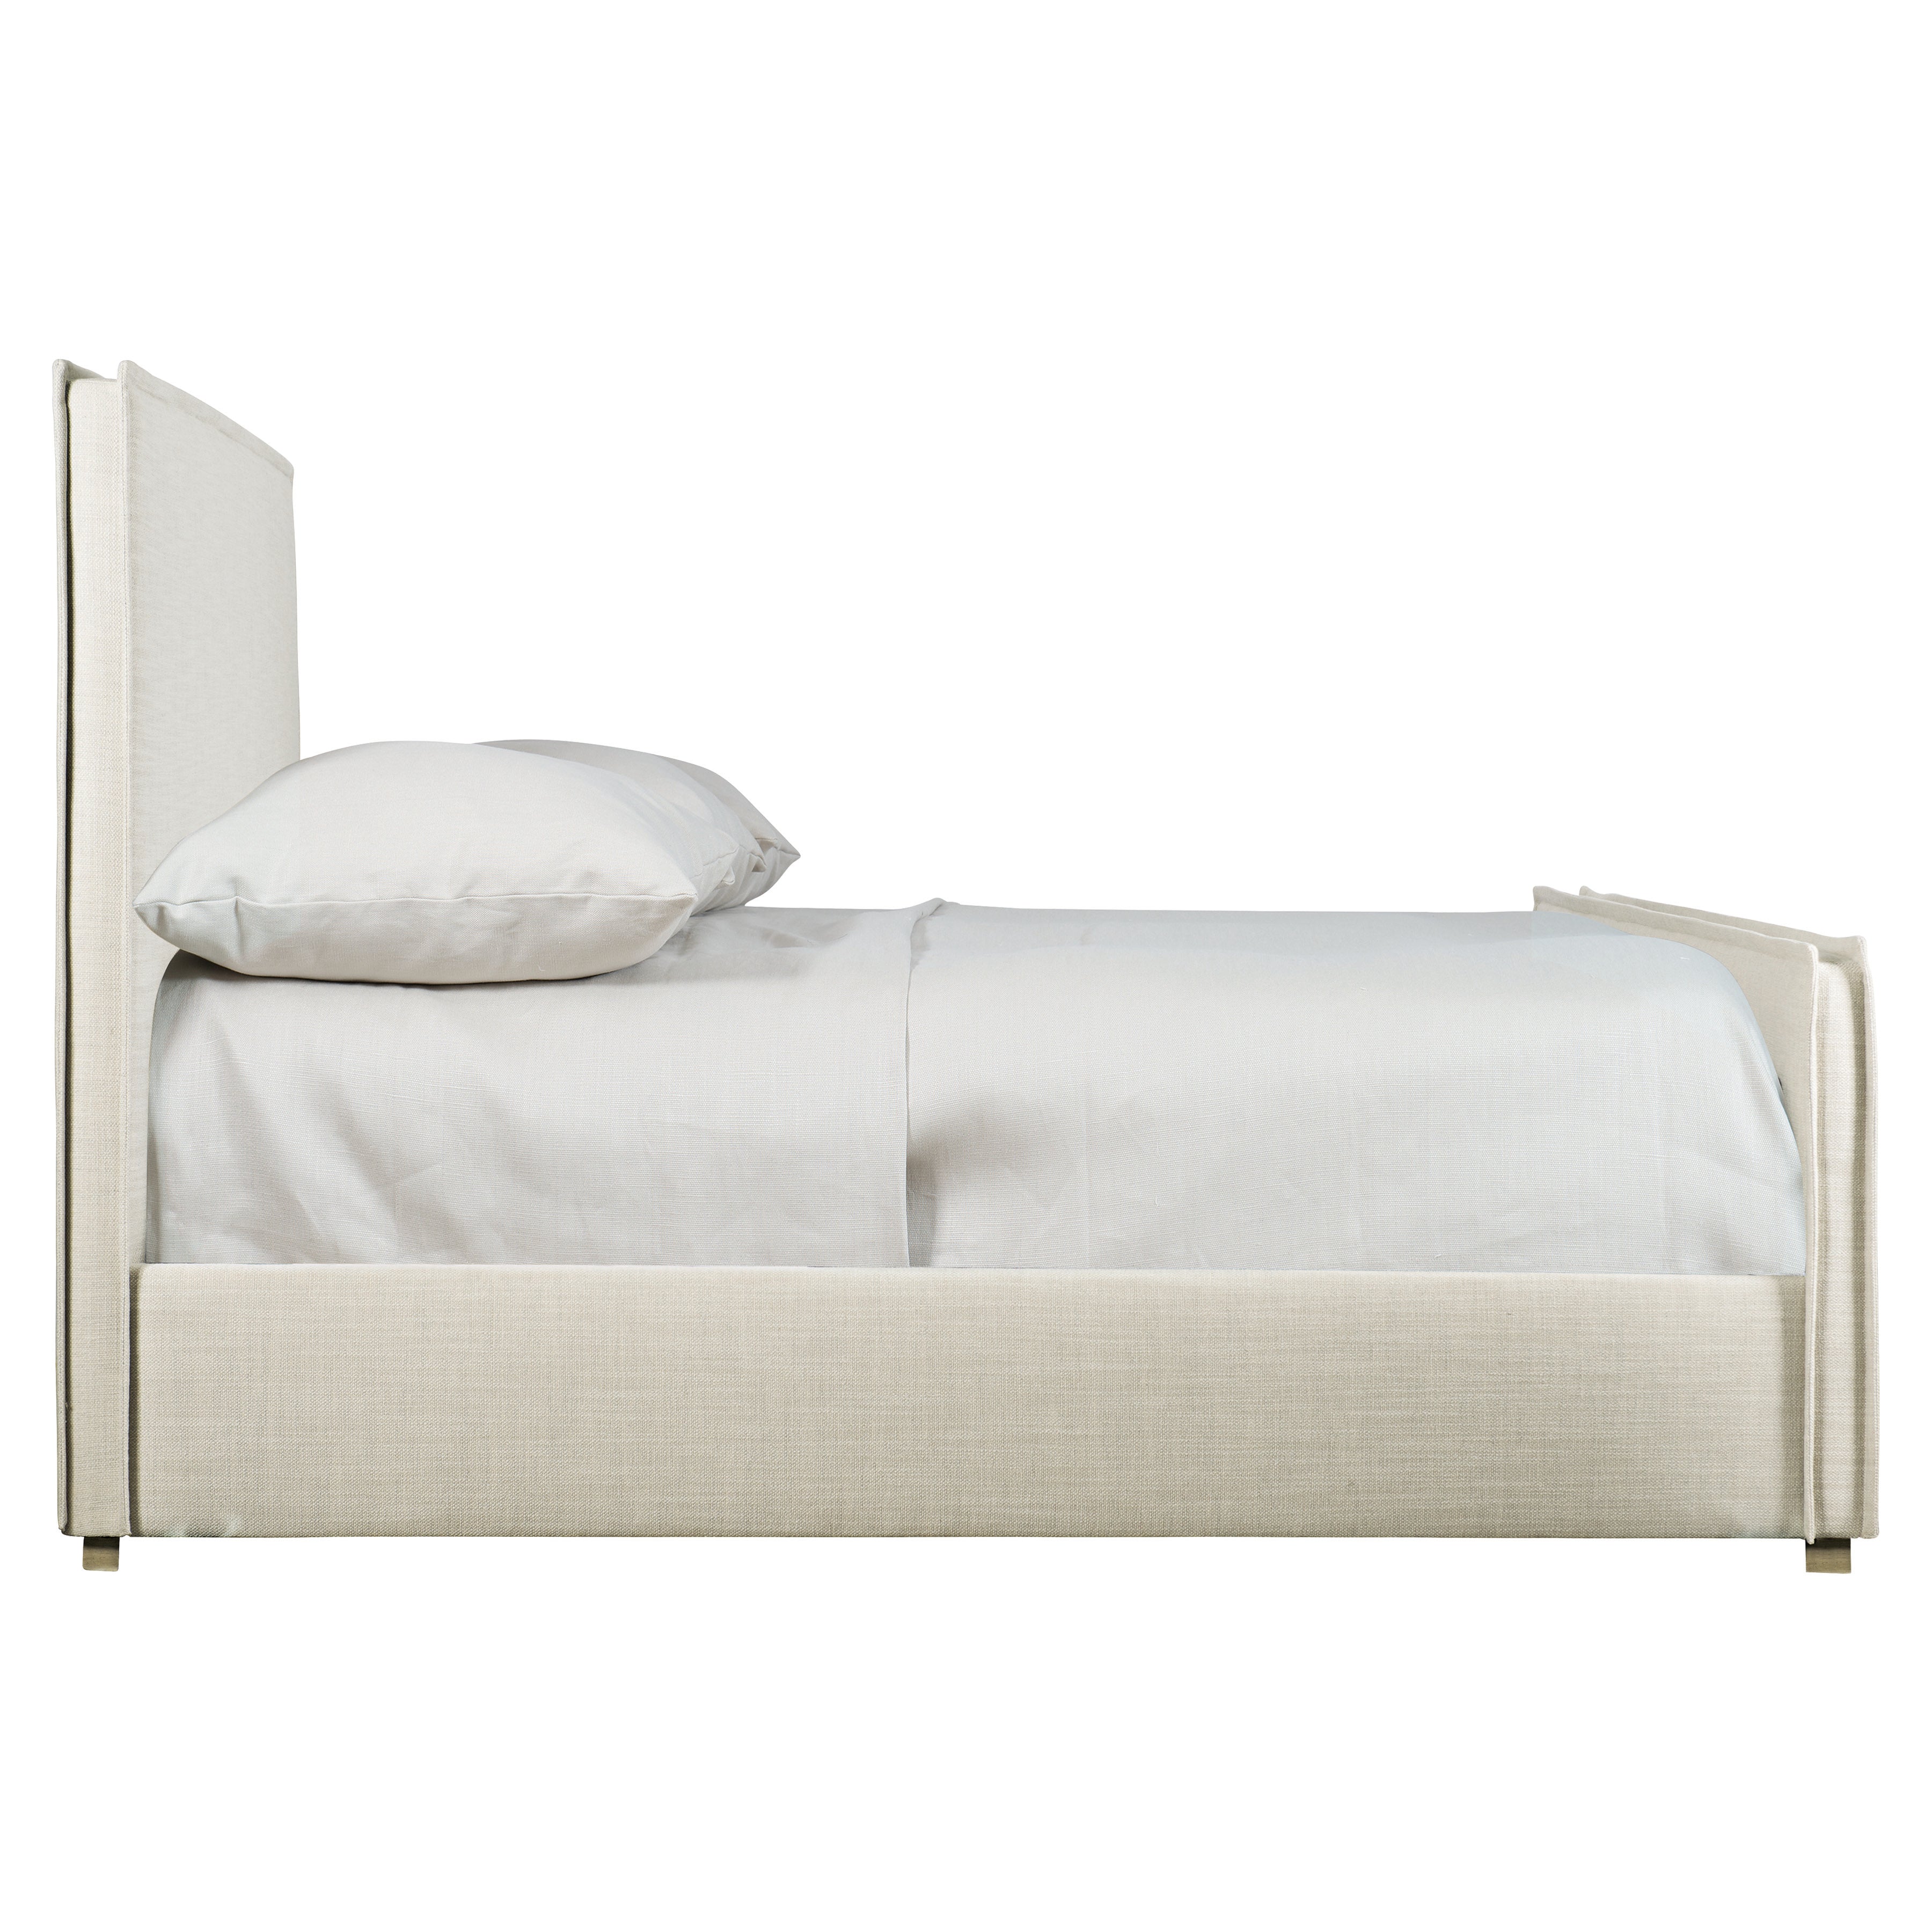 Sawyer King Panel Bed with Light Grey Upholstery